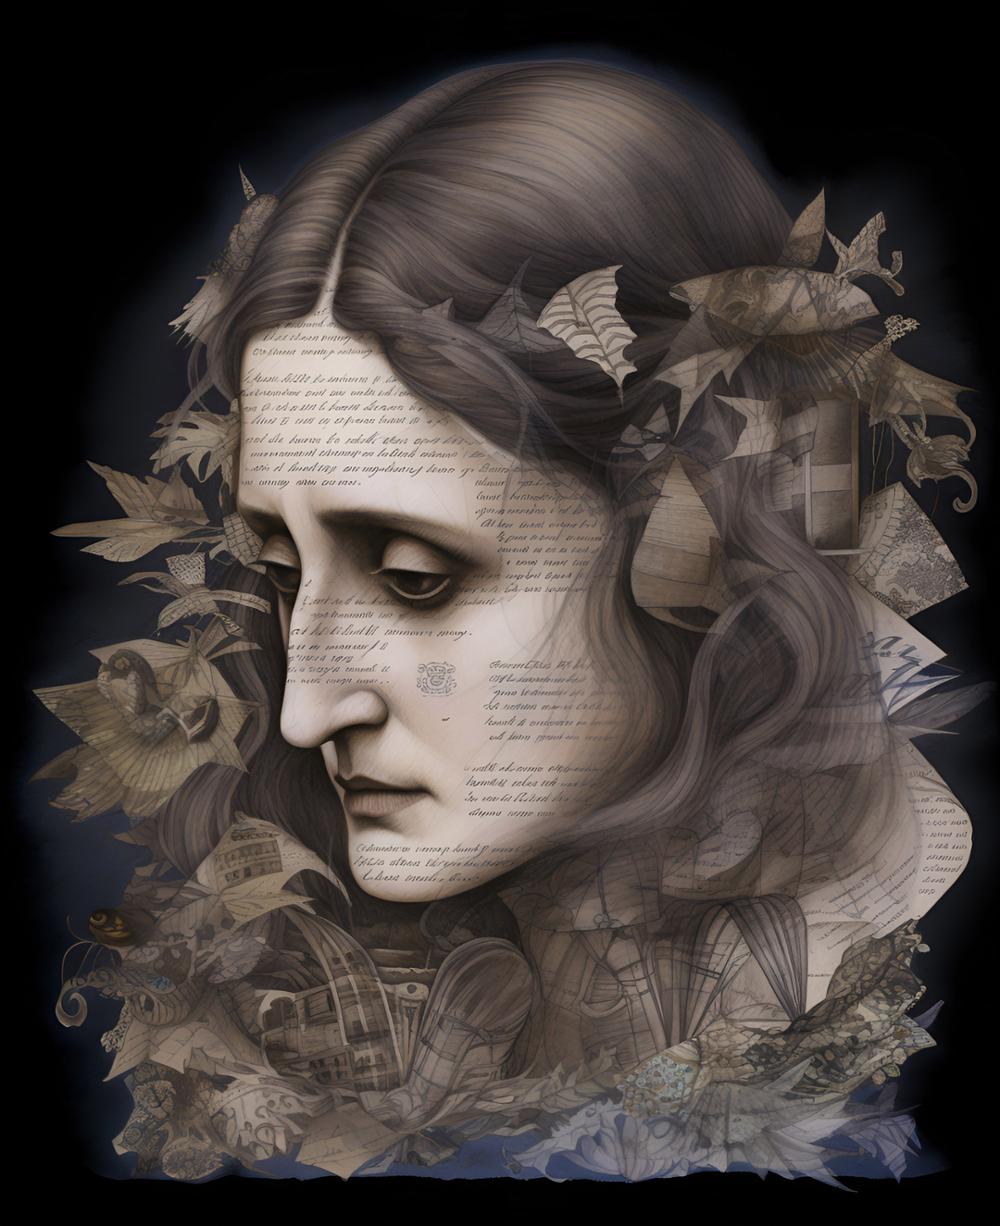 a drawing of the author, Mary Shelley